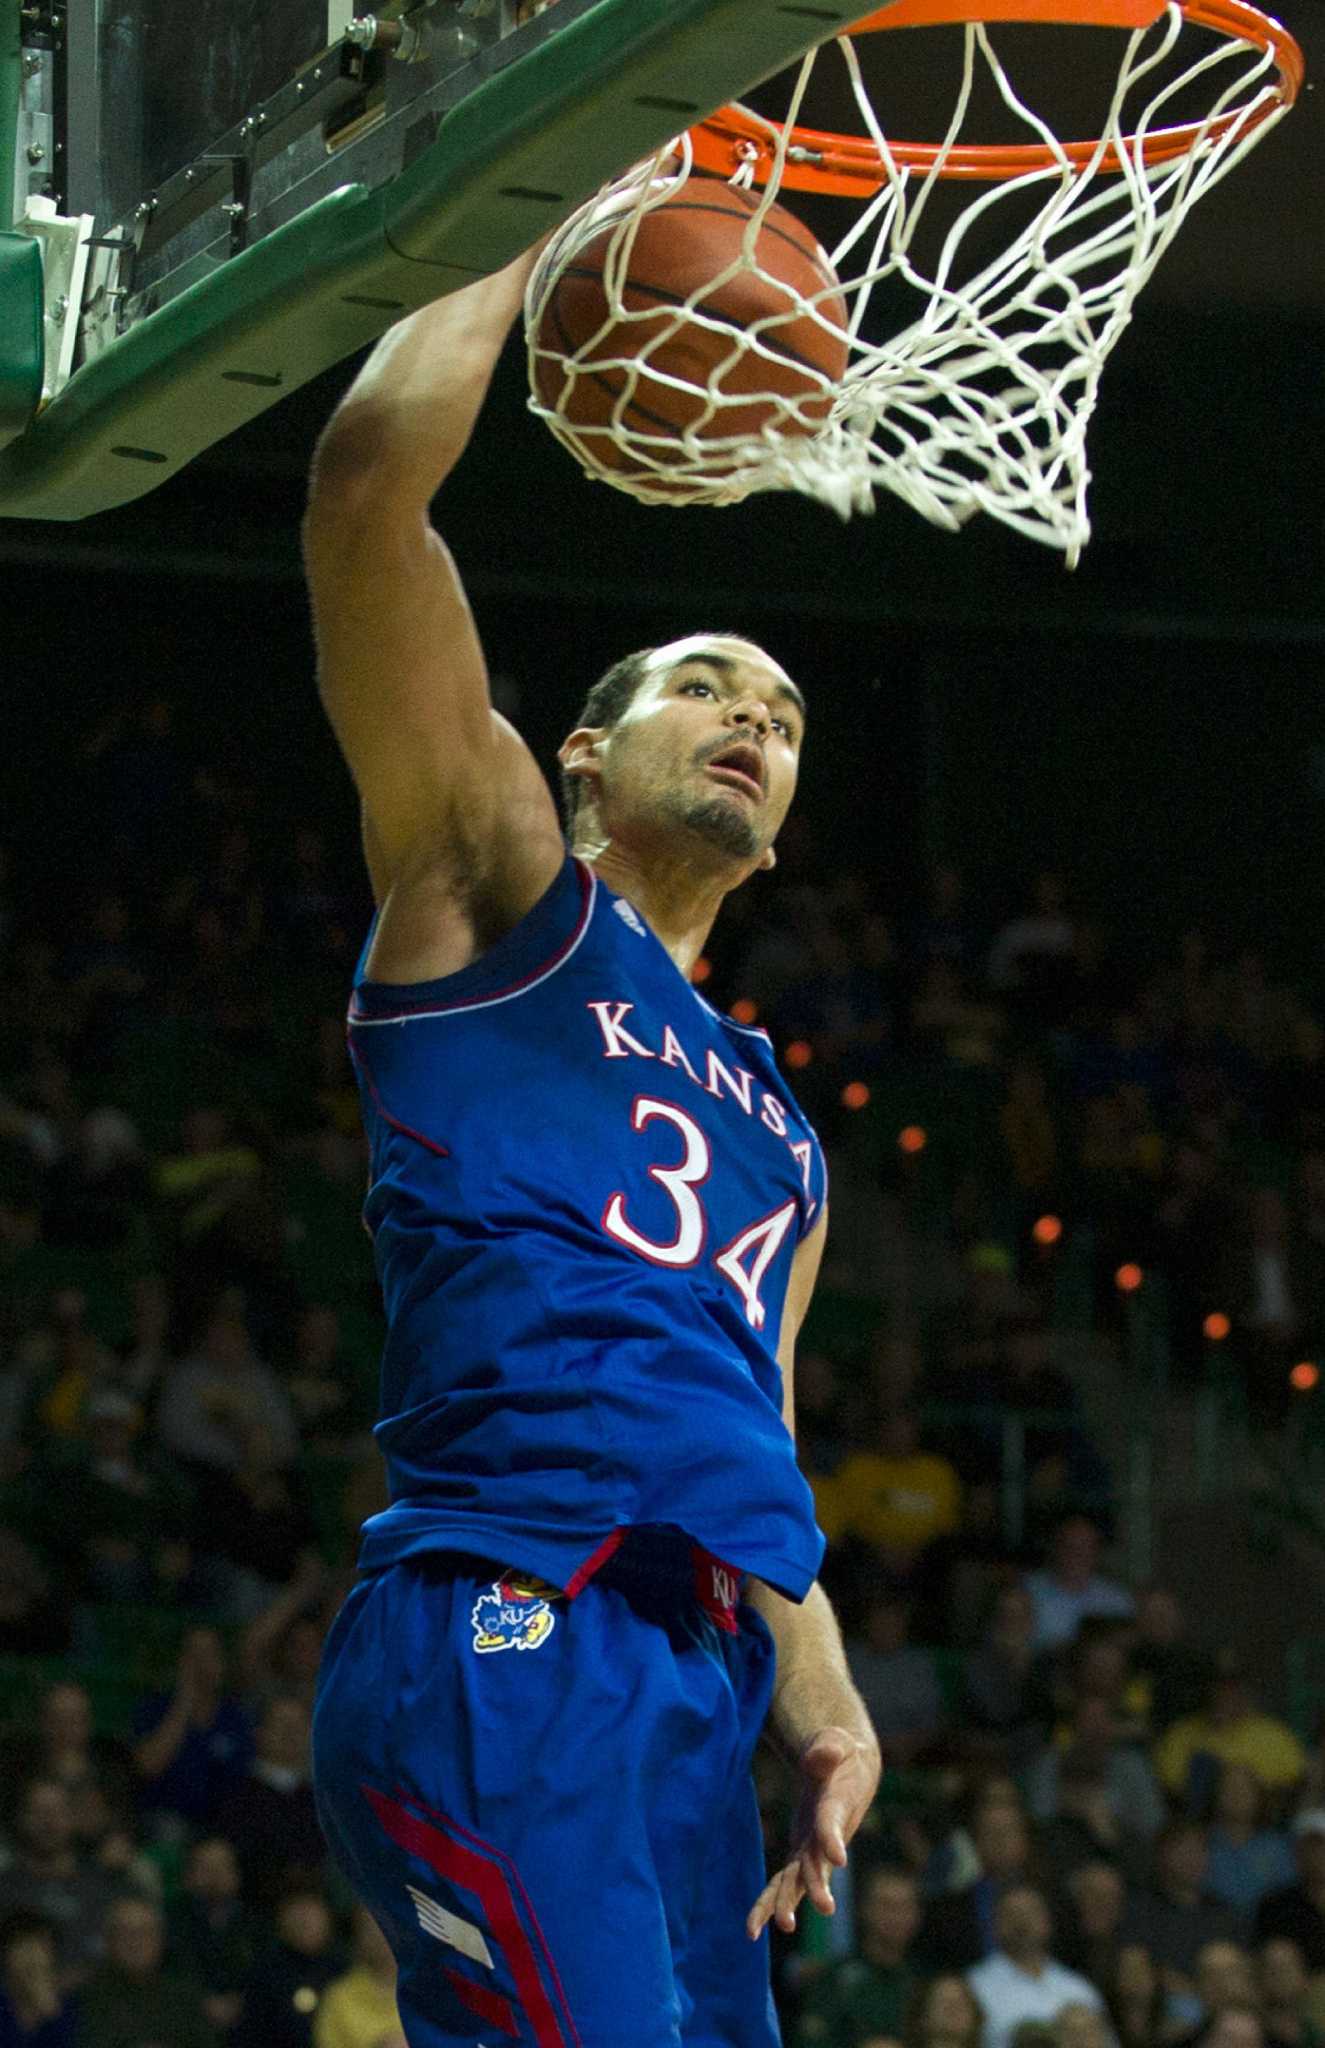 People are convinced 22-year-old Perry Ellis has played at Kansas